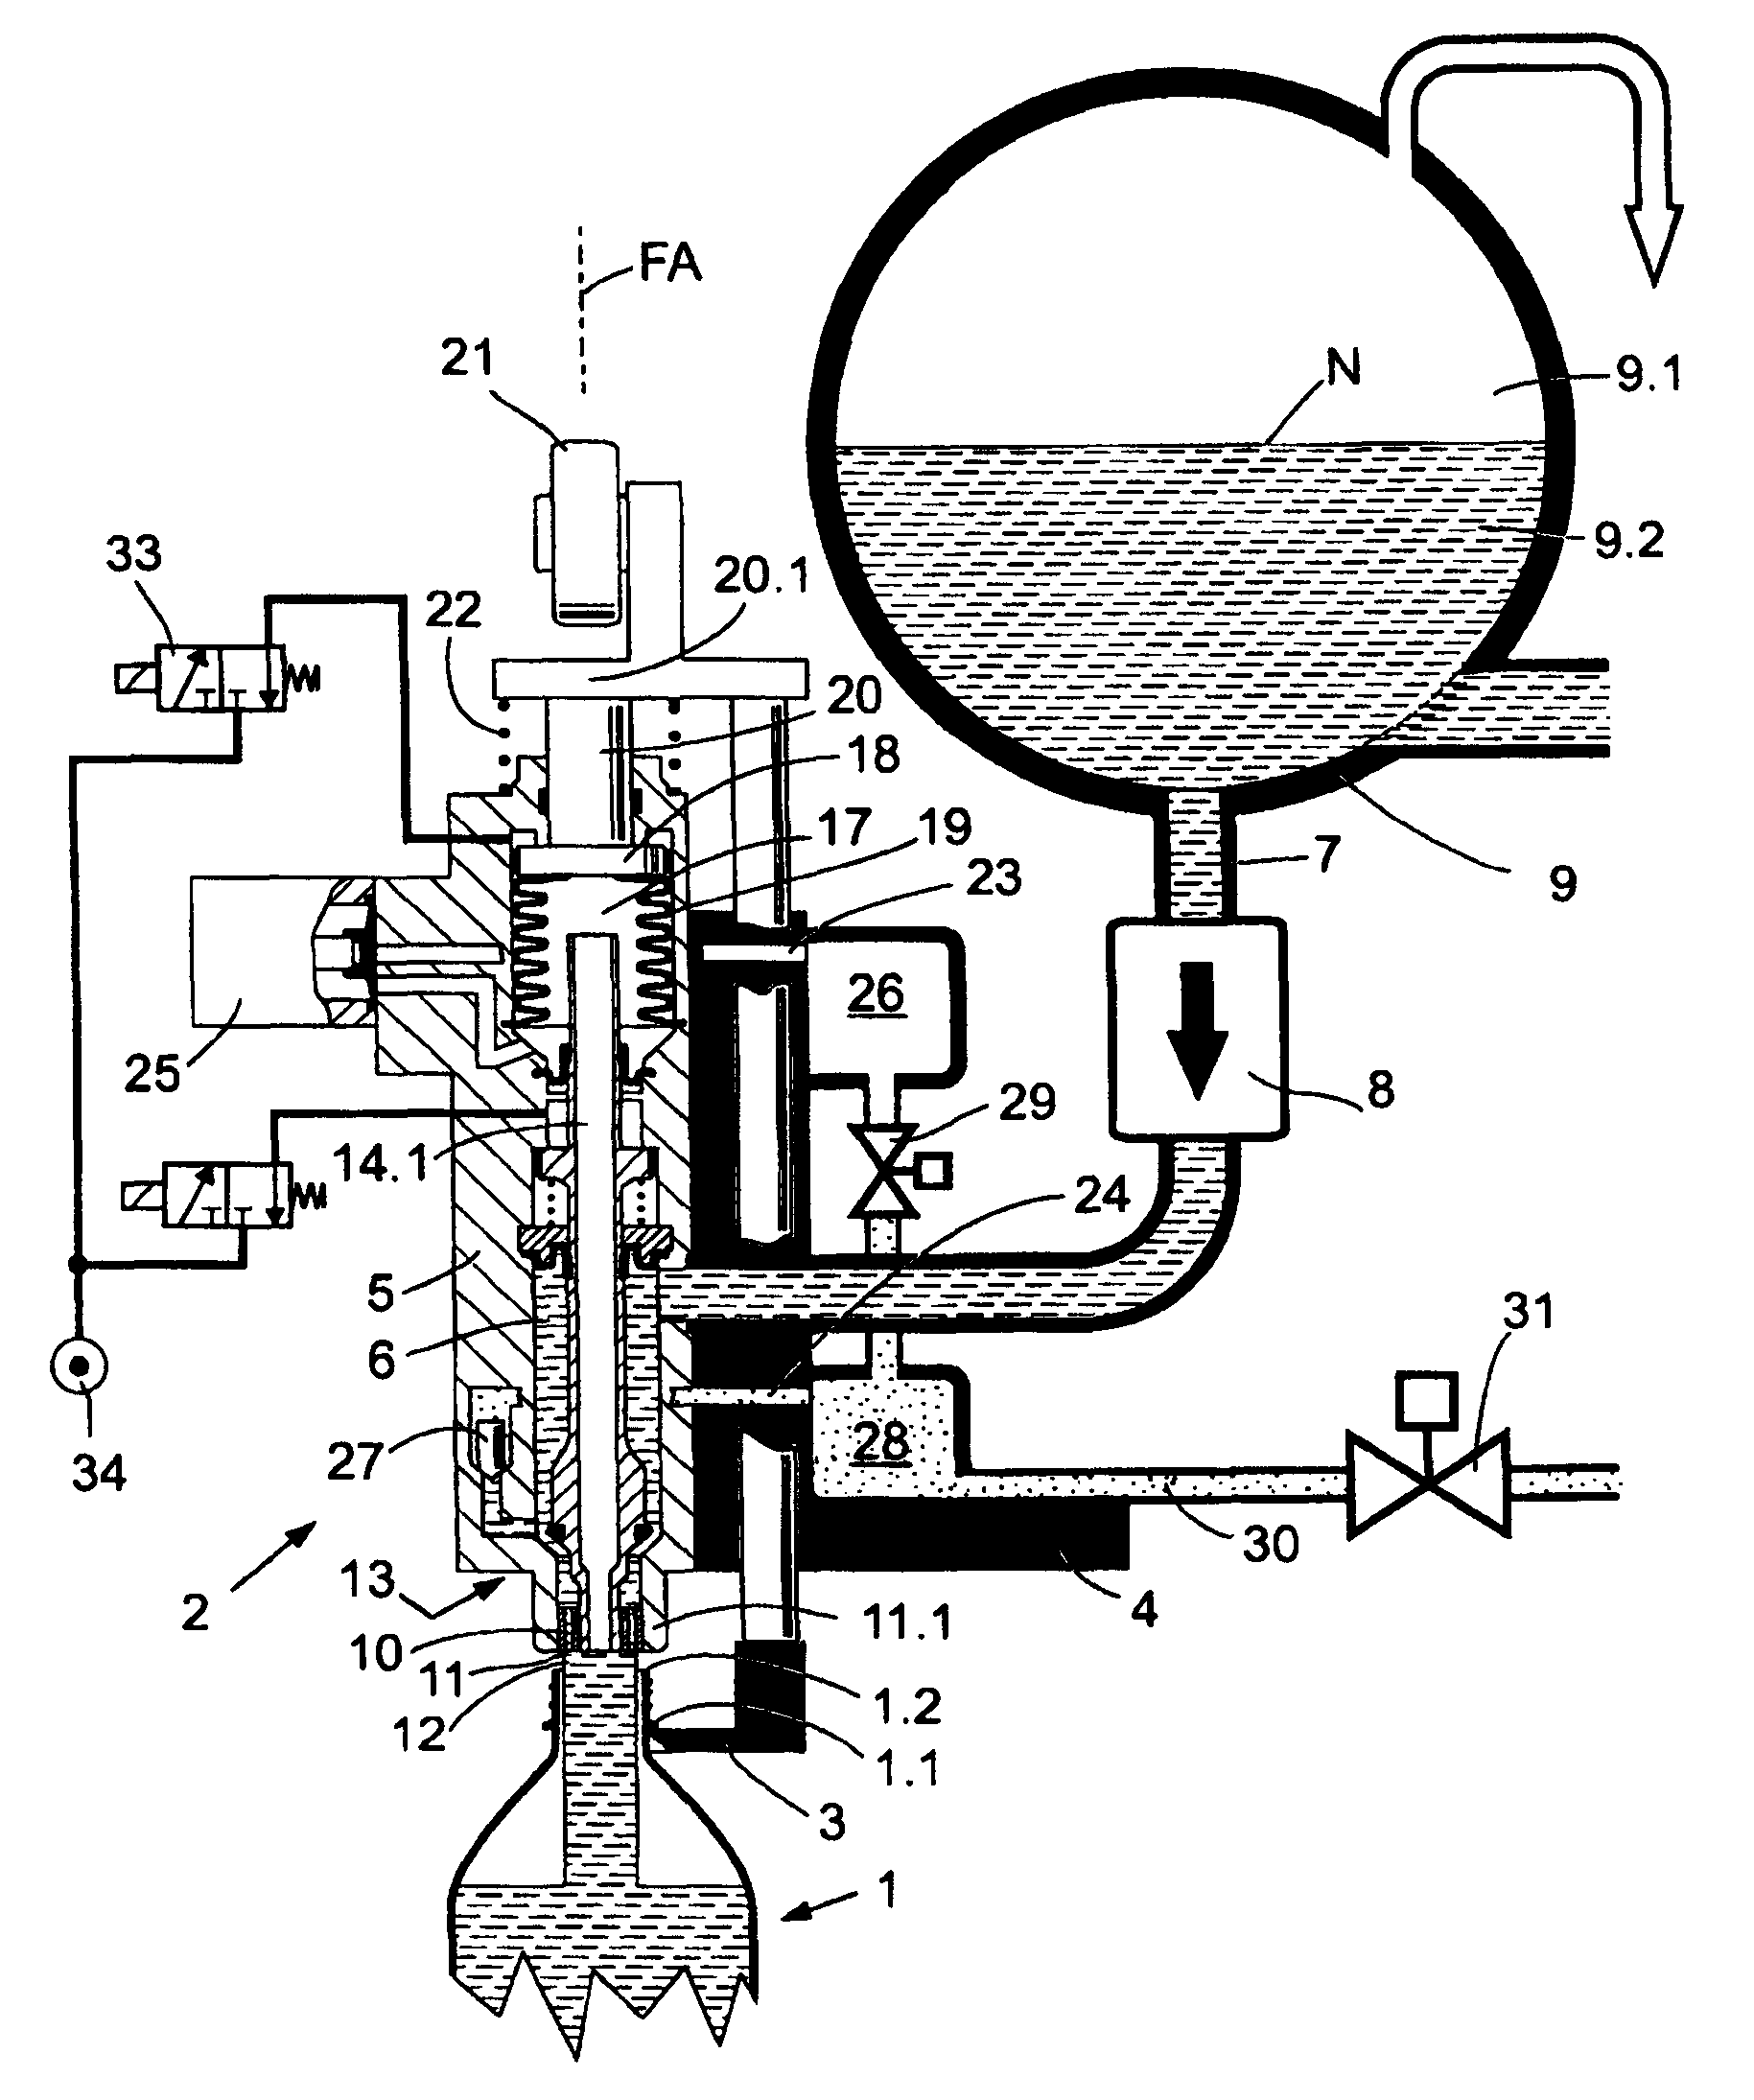 Method of treating a beverage bottle filling machine in a beverage bottling plant, method of cleaning a container filling machine in a container filling plant, and arrangements therefor